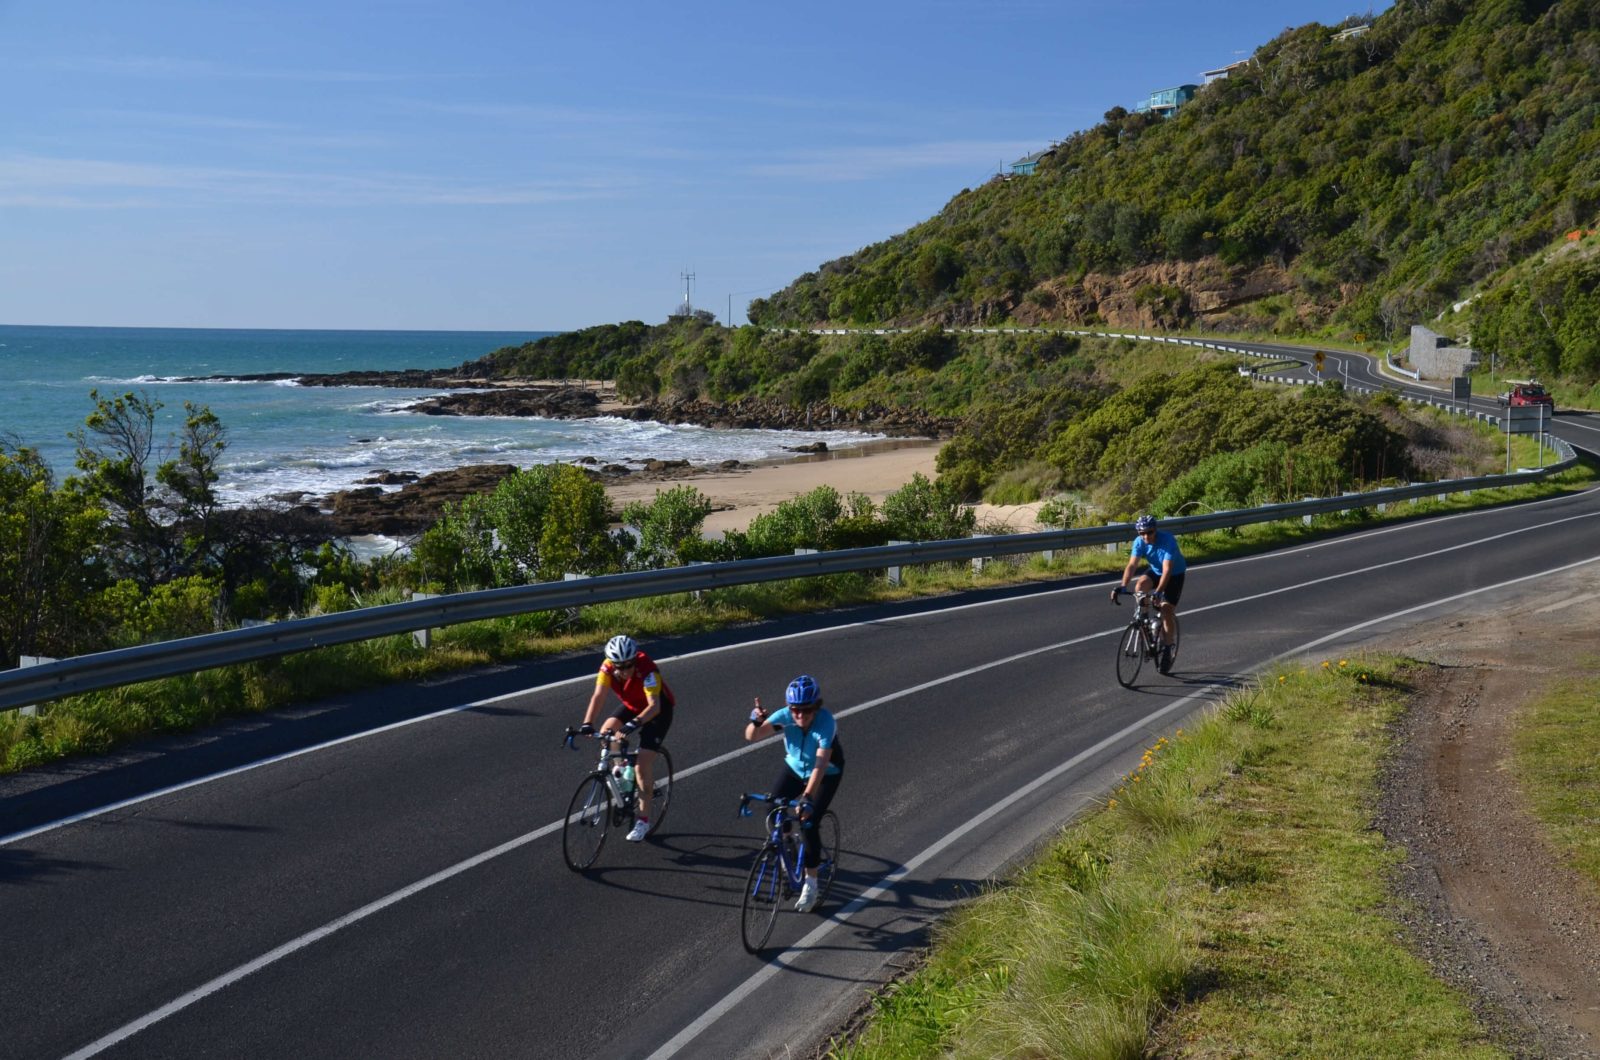 AllTrails Bicycle Tours Great Ocean Road Cycle Tour